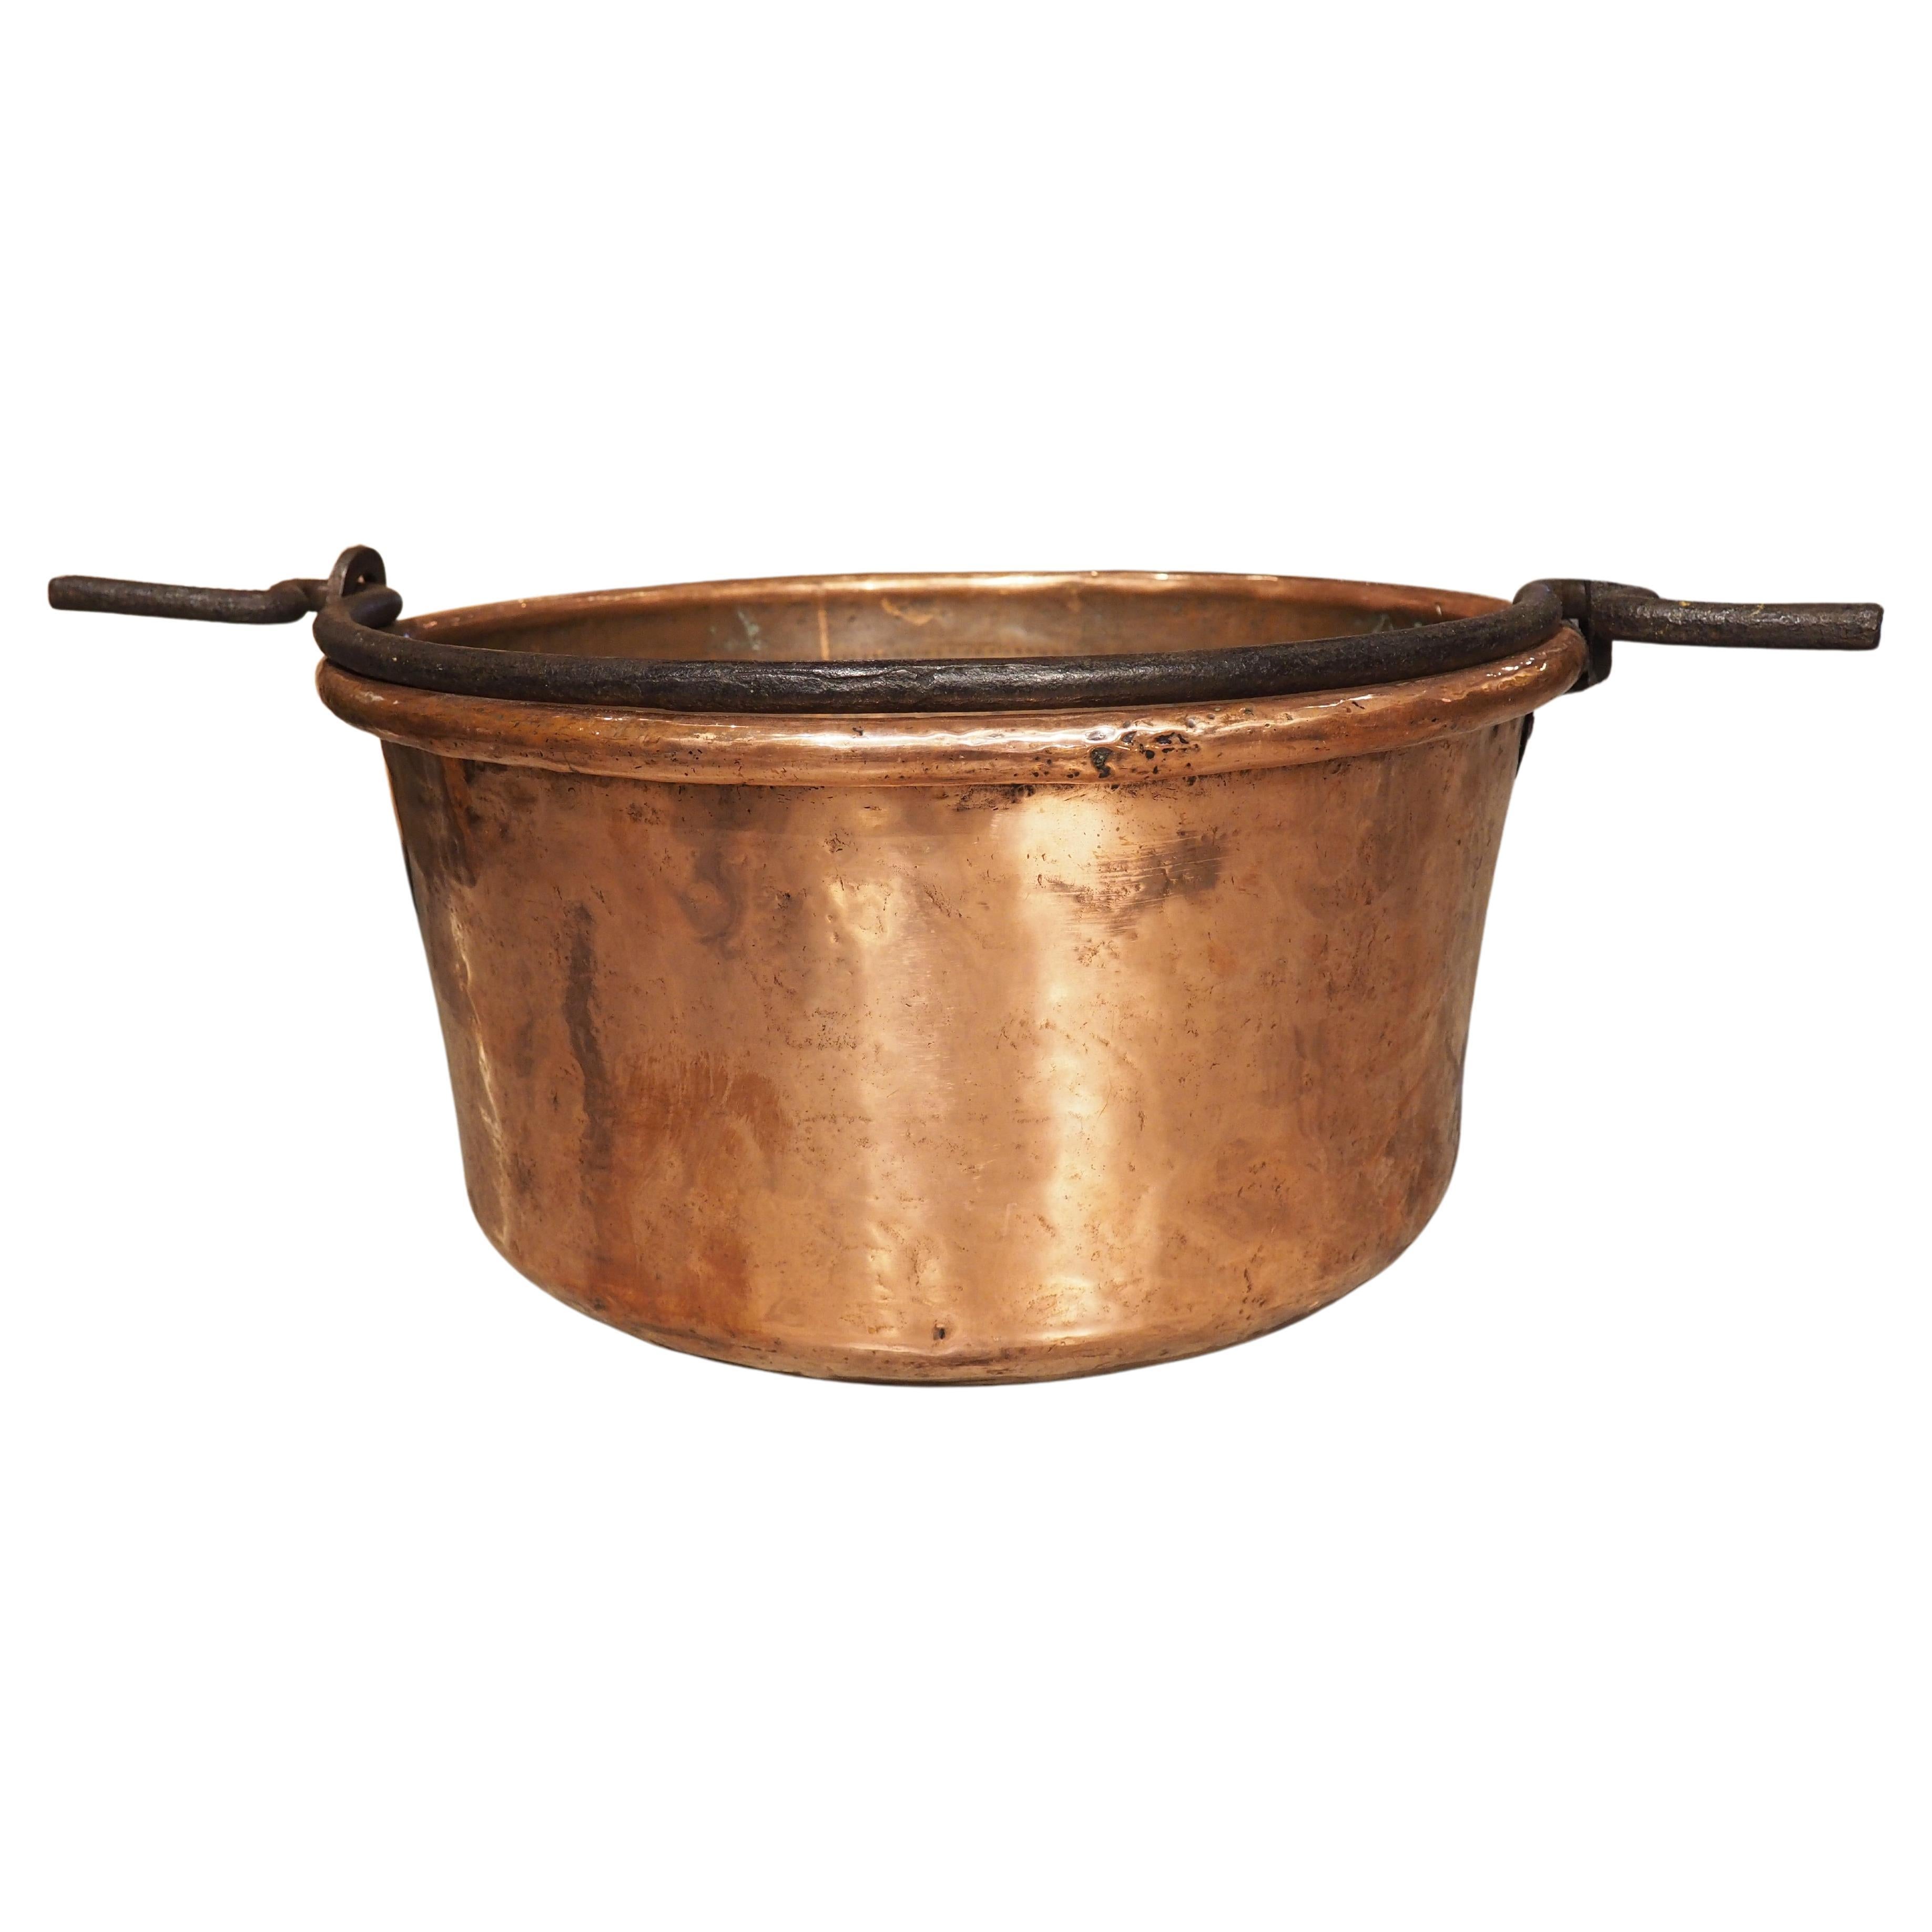 Antique Polished Copper Chaudron or Wine Cooler, Wrought Iron Handle, circa 1850